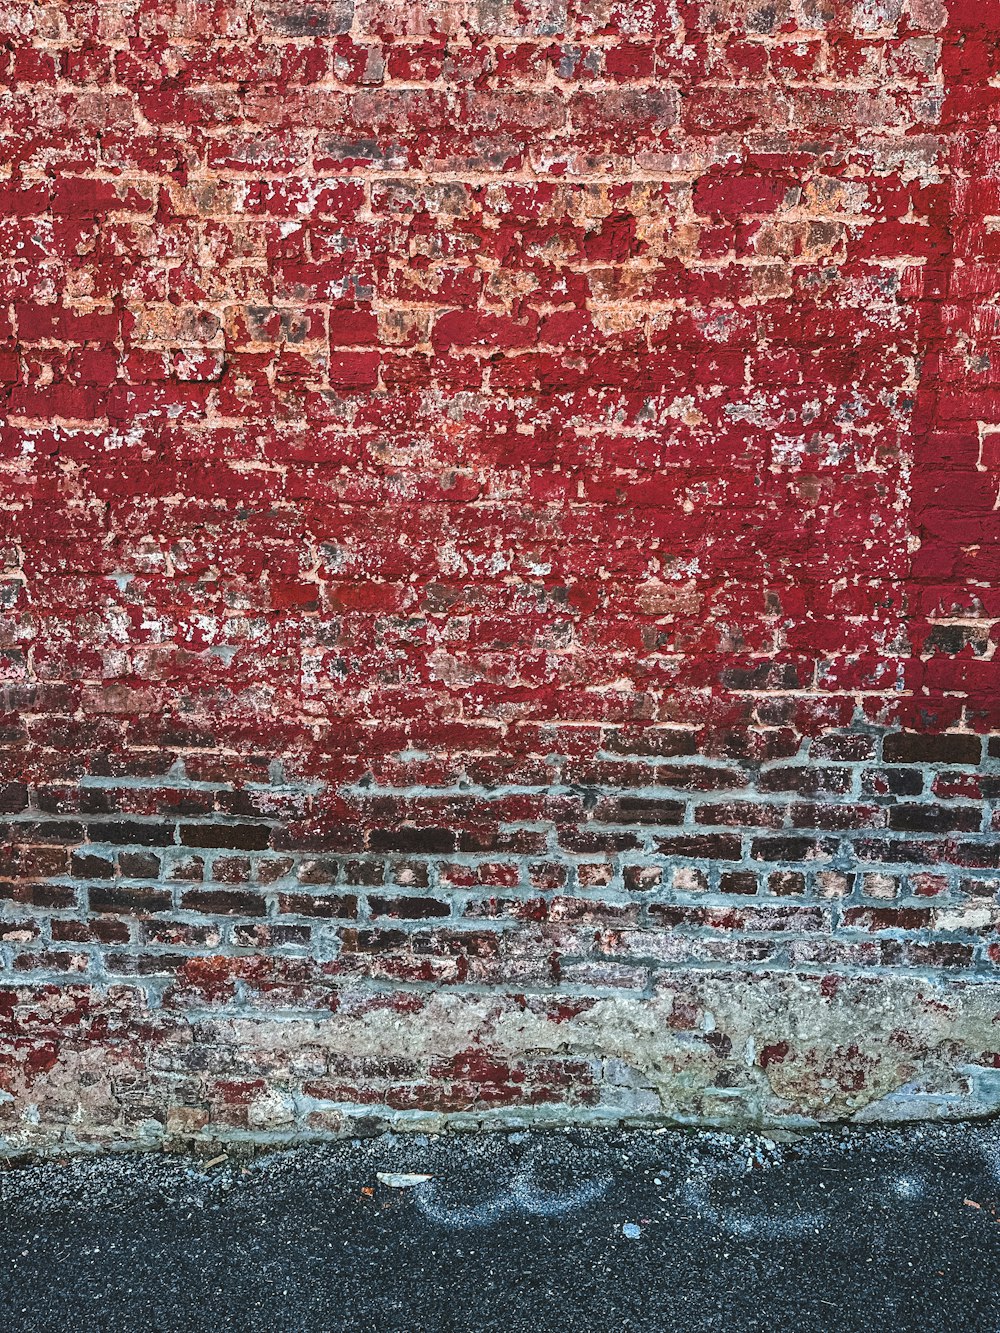 a red brick wall with a fire hydrant in front of it